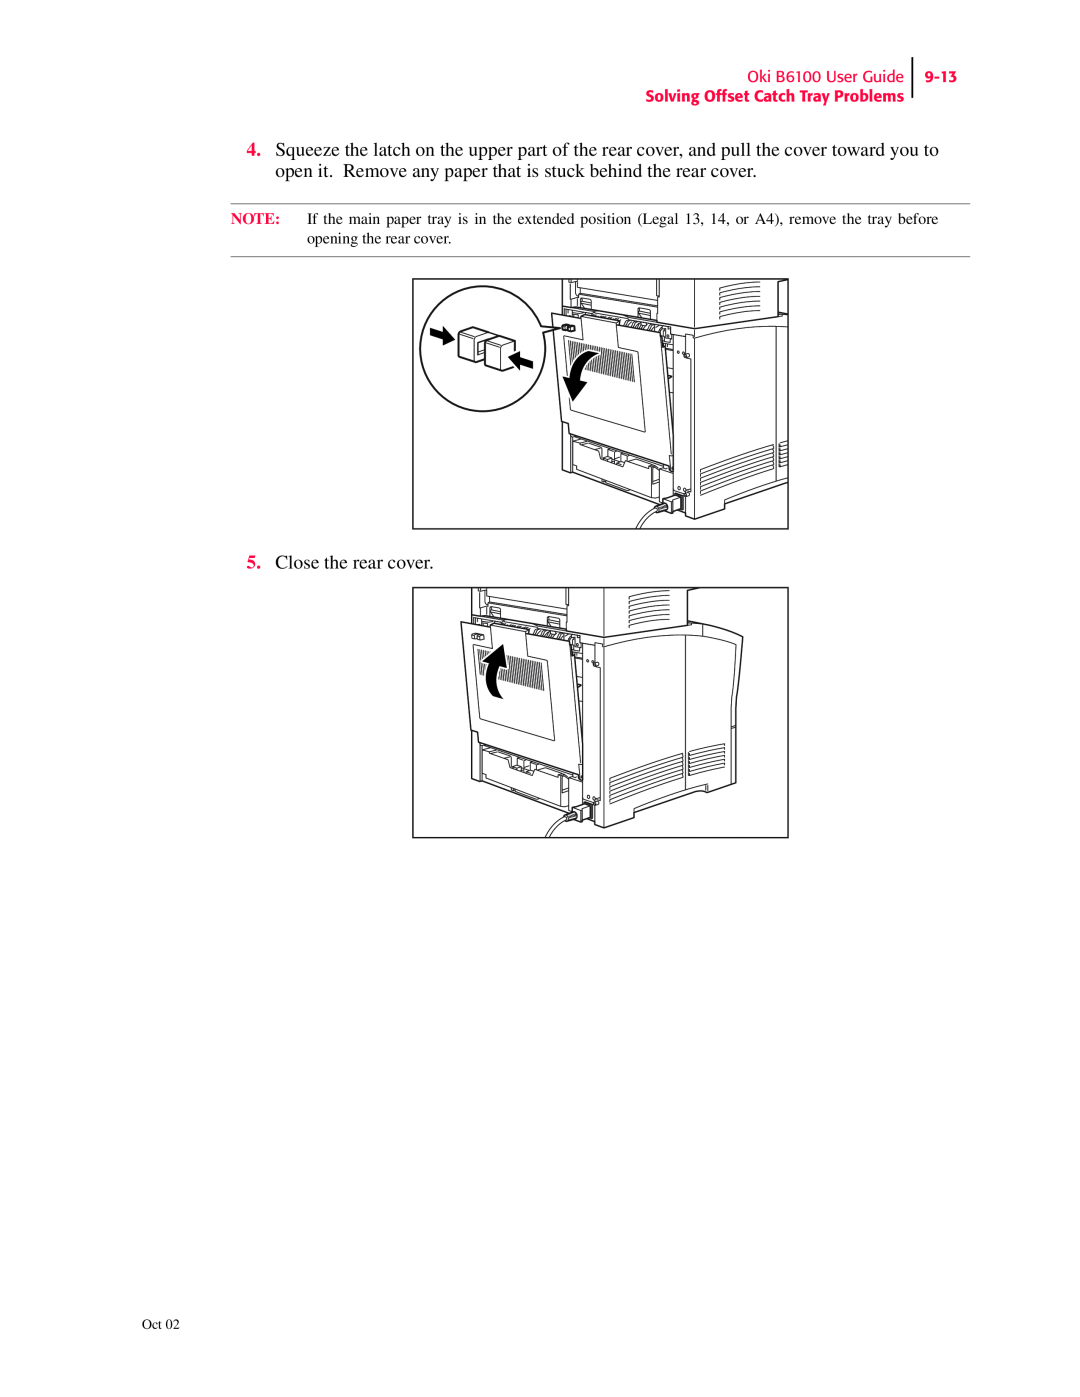 Oki manual Close the rear cover, Oki B6100 User Guide Solving Offset Catch Tray Problems, 9-13 